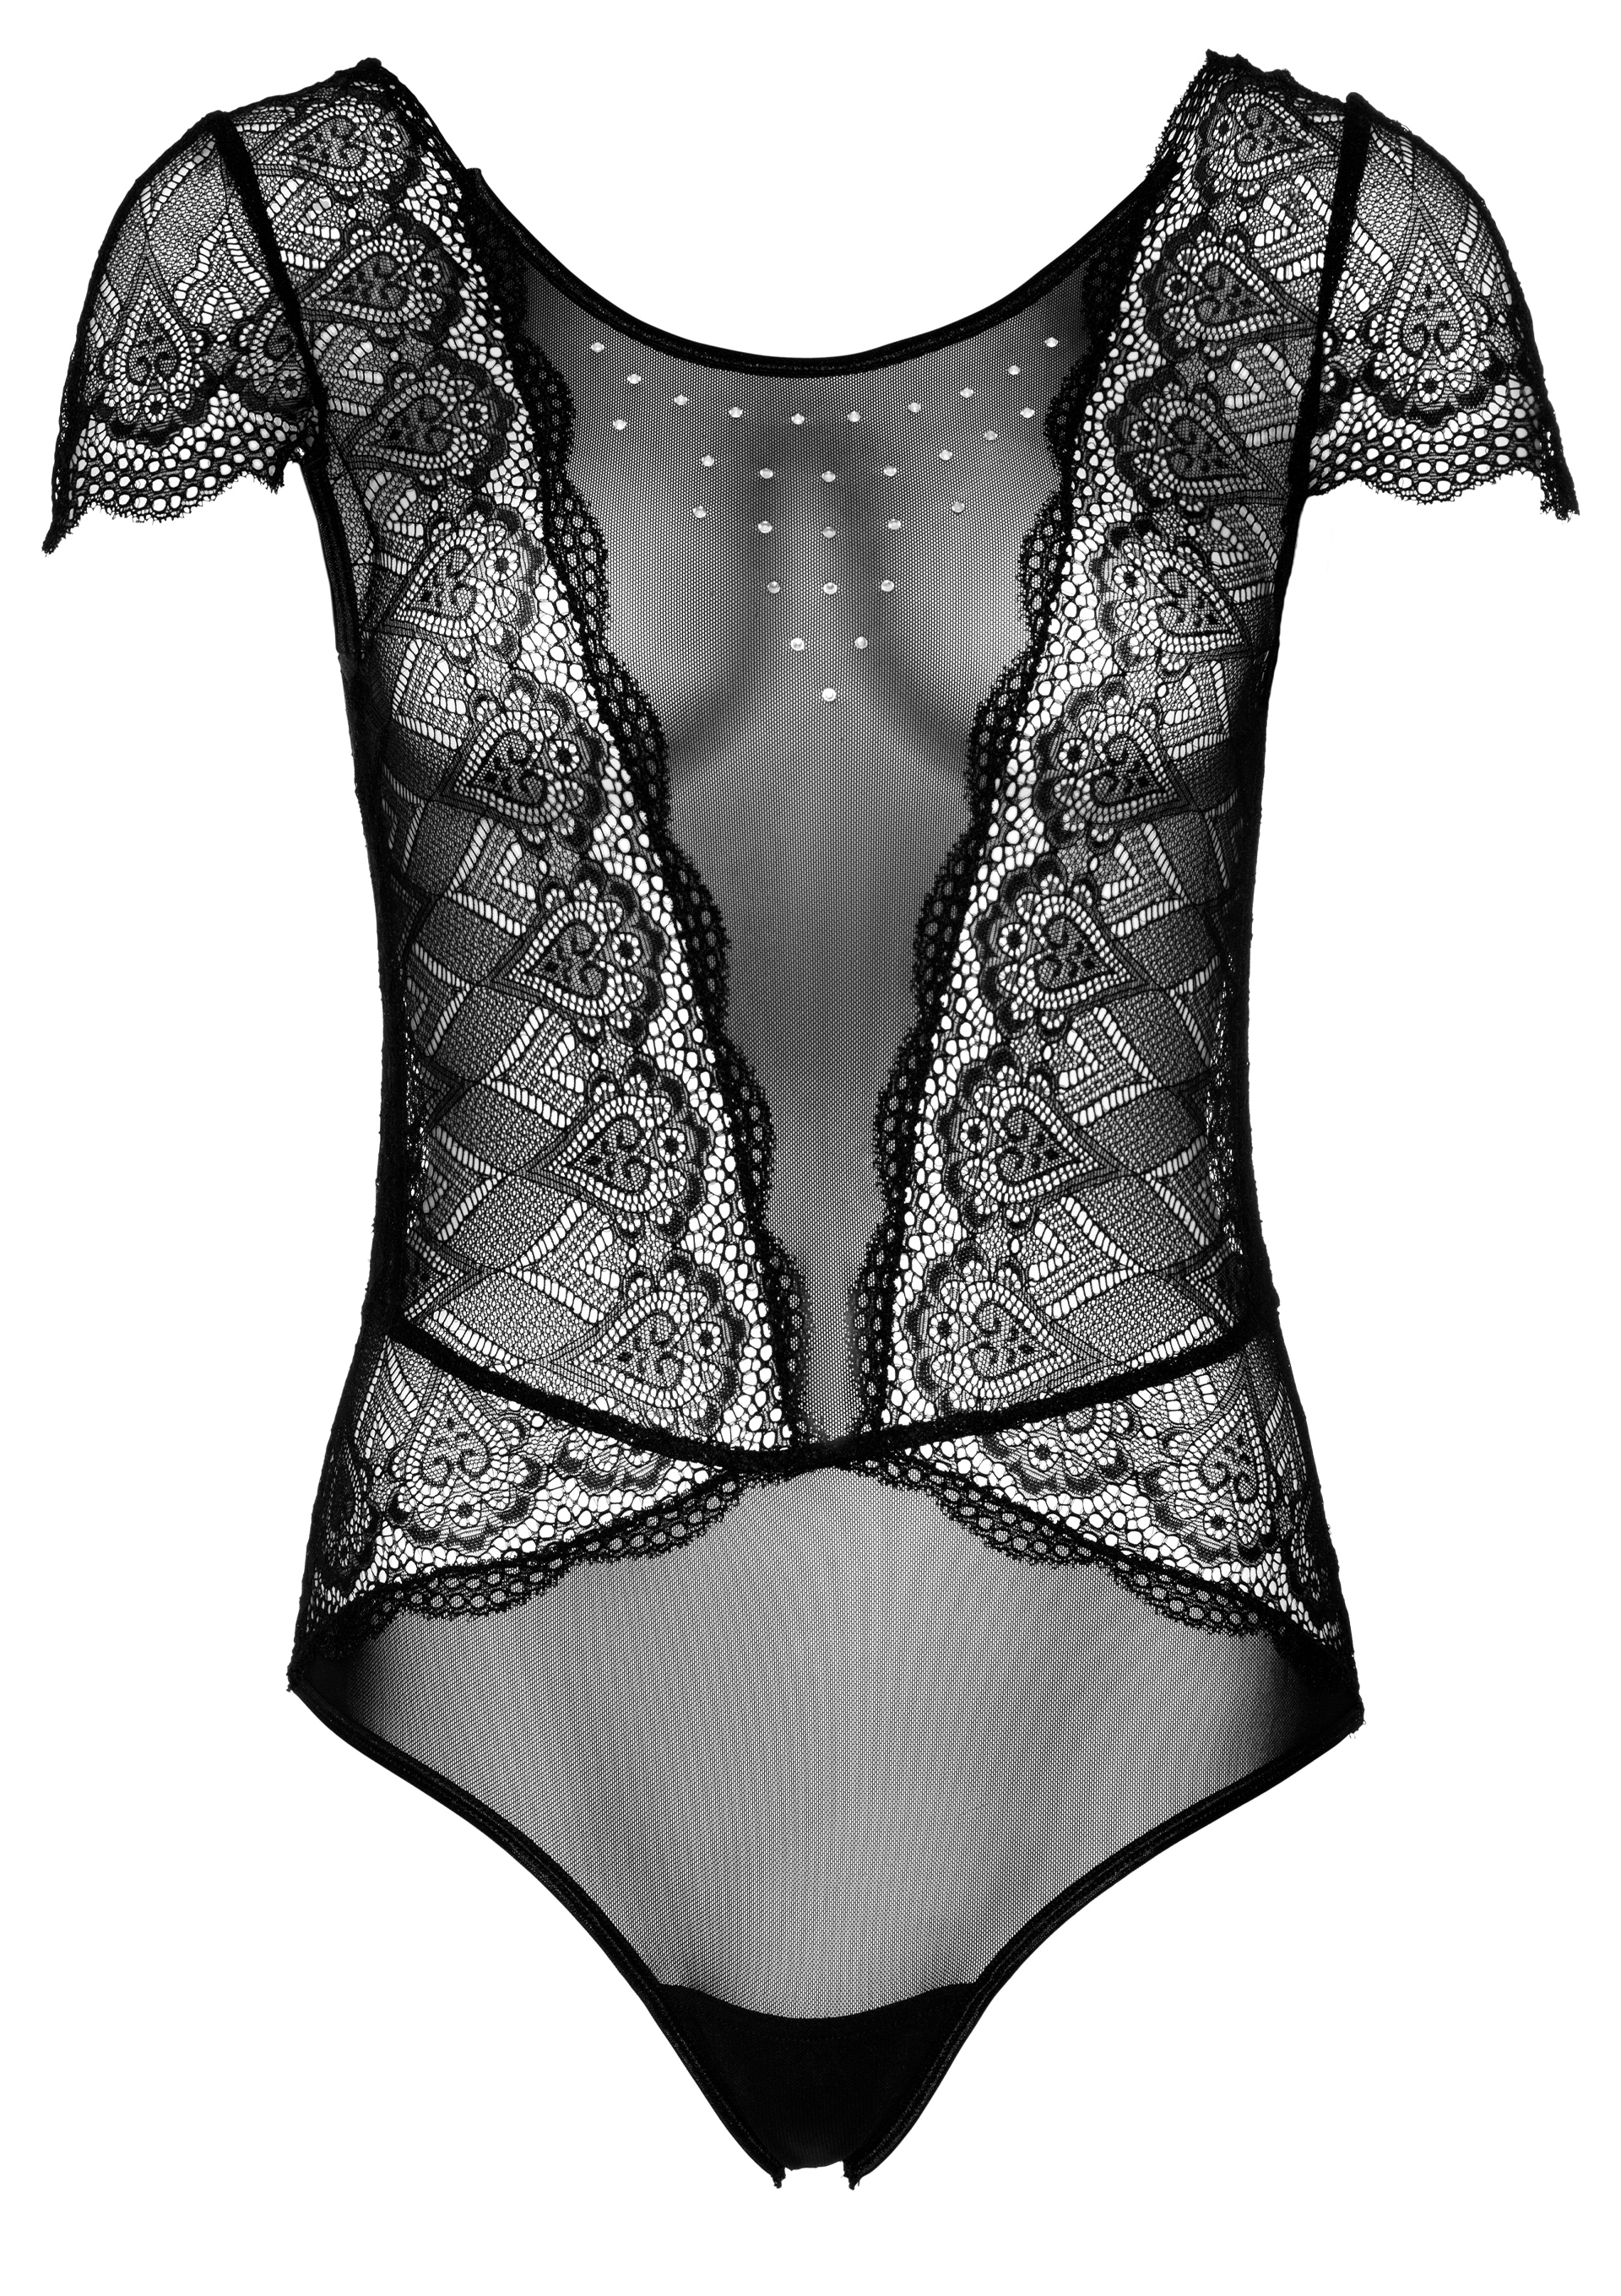 Daring - Daring Floral Lace and Mesh Teddy